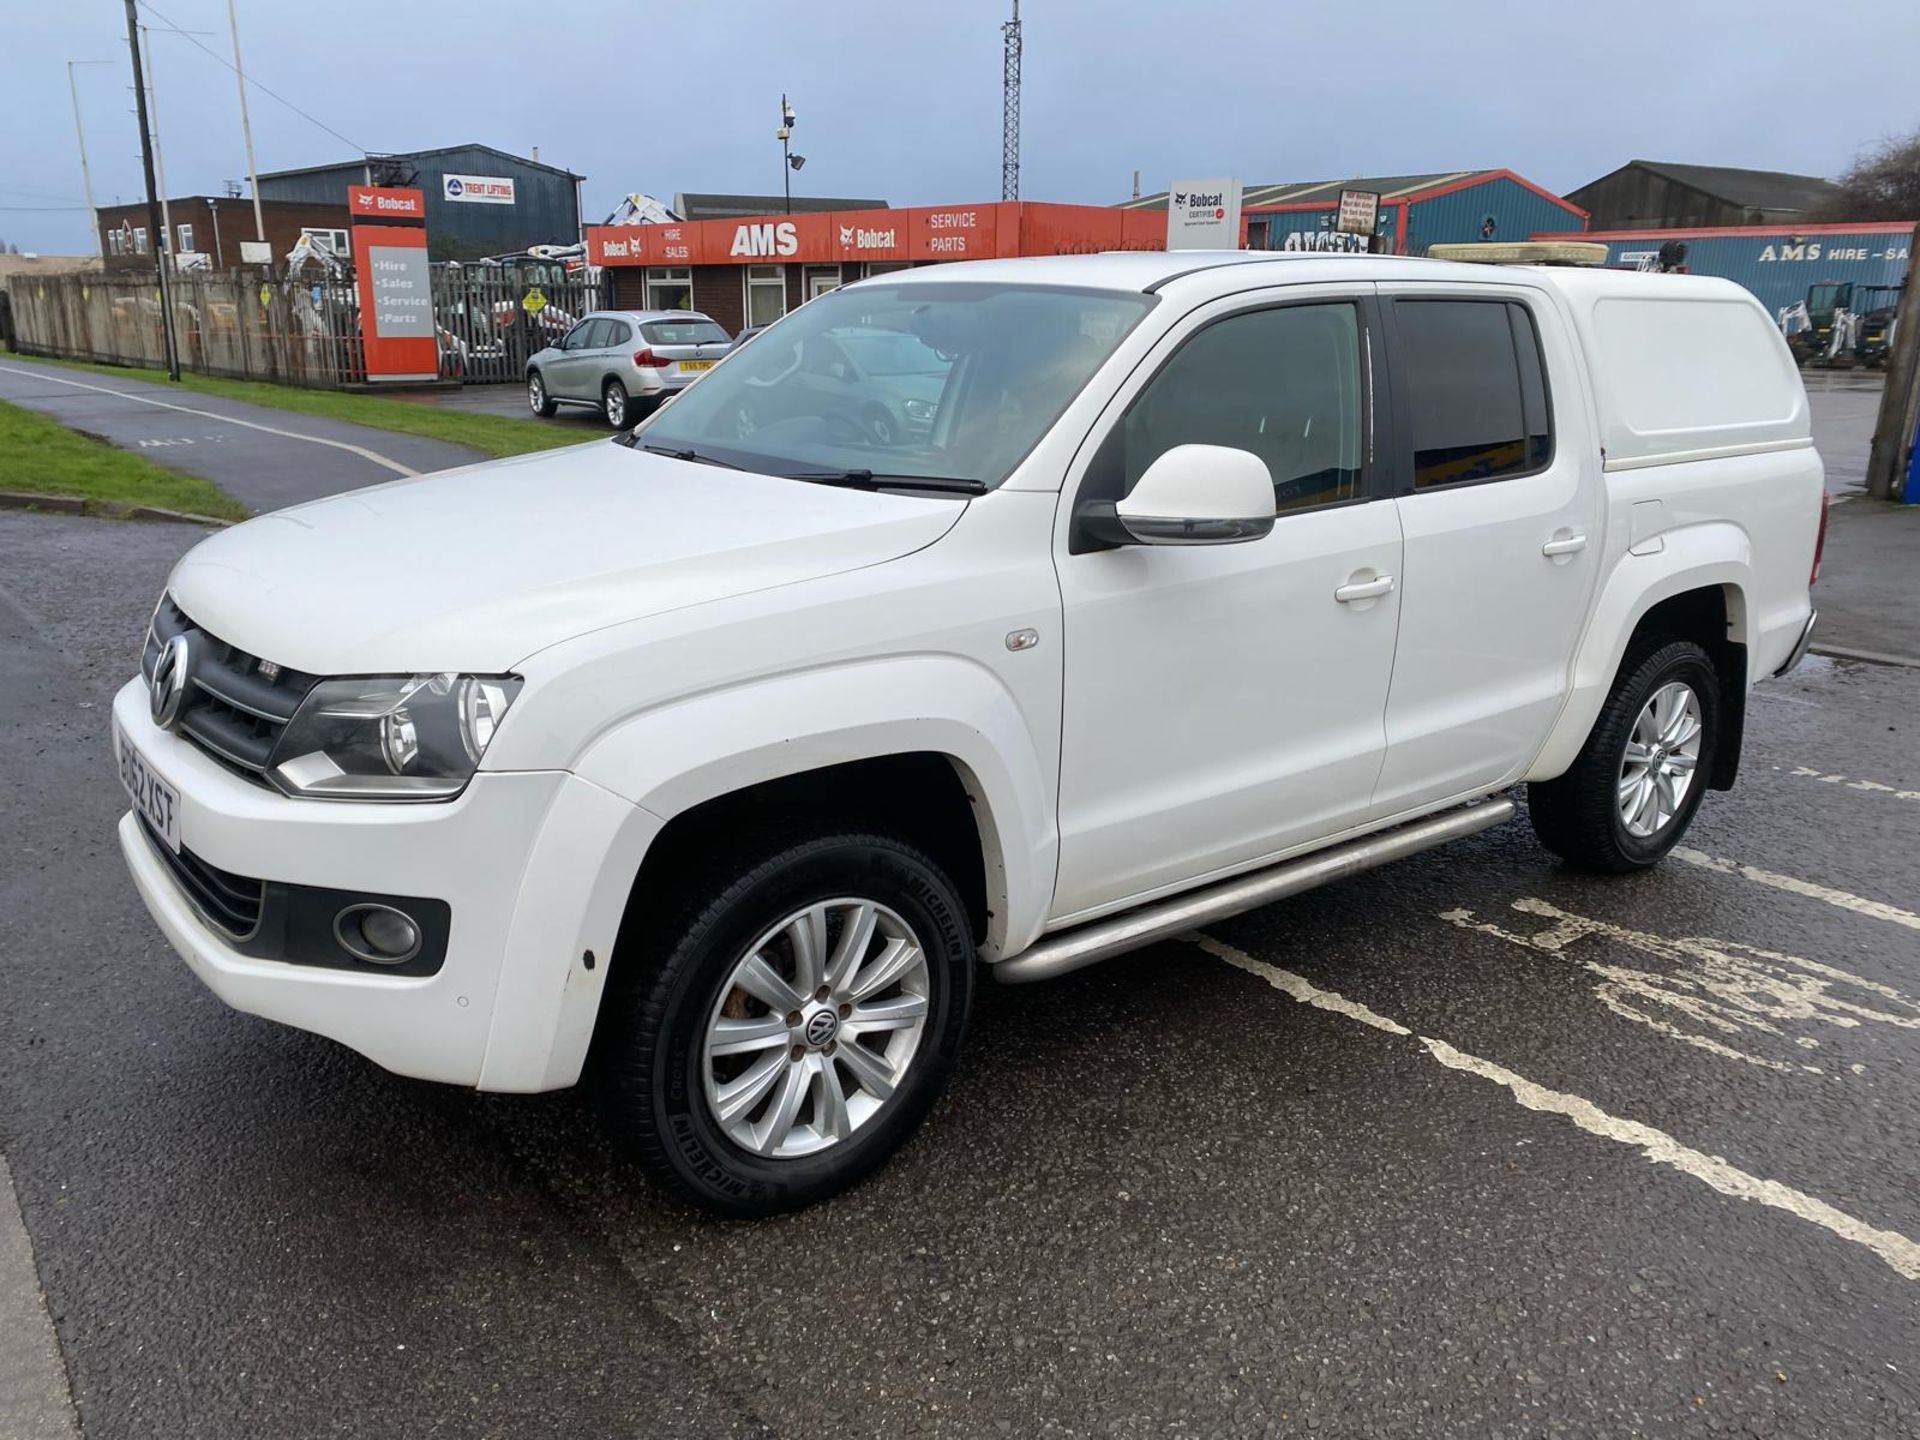 2012 62 VOLKSWAGEN AMOROK PICK UP - 68K MILES - 4X4 - AIR CON - LEATHER SEATS.